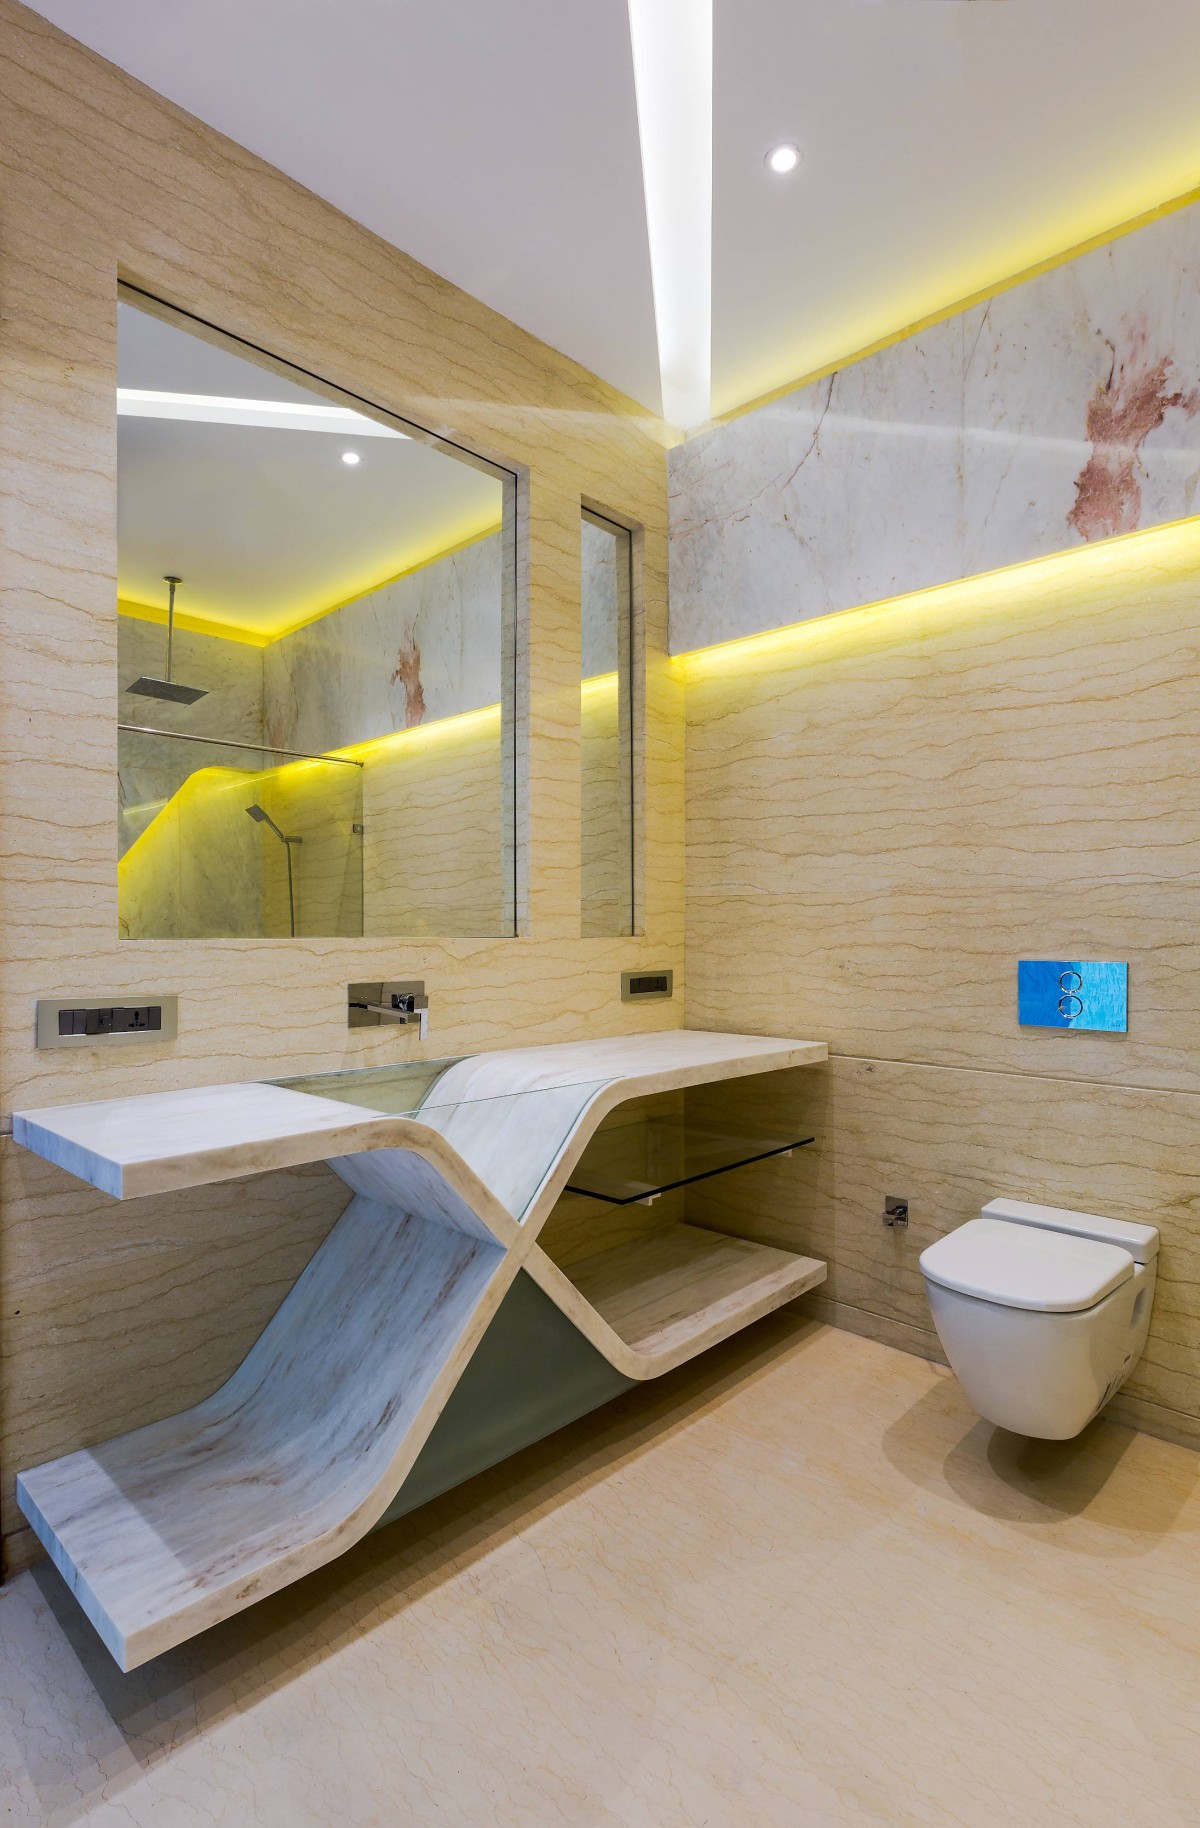 Toilet of The BungaLOW by Anagram Architects